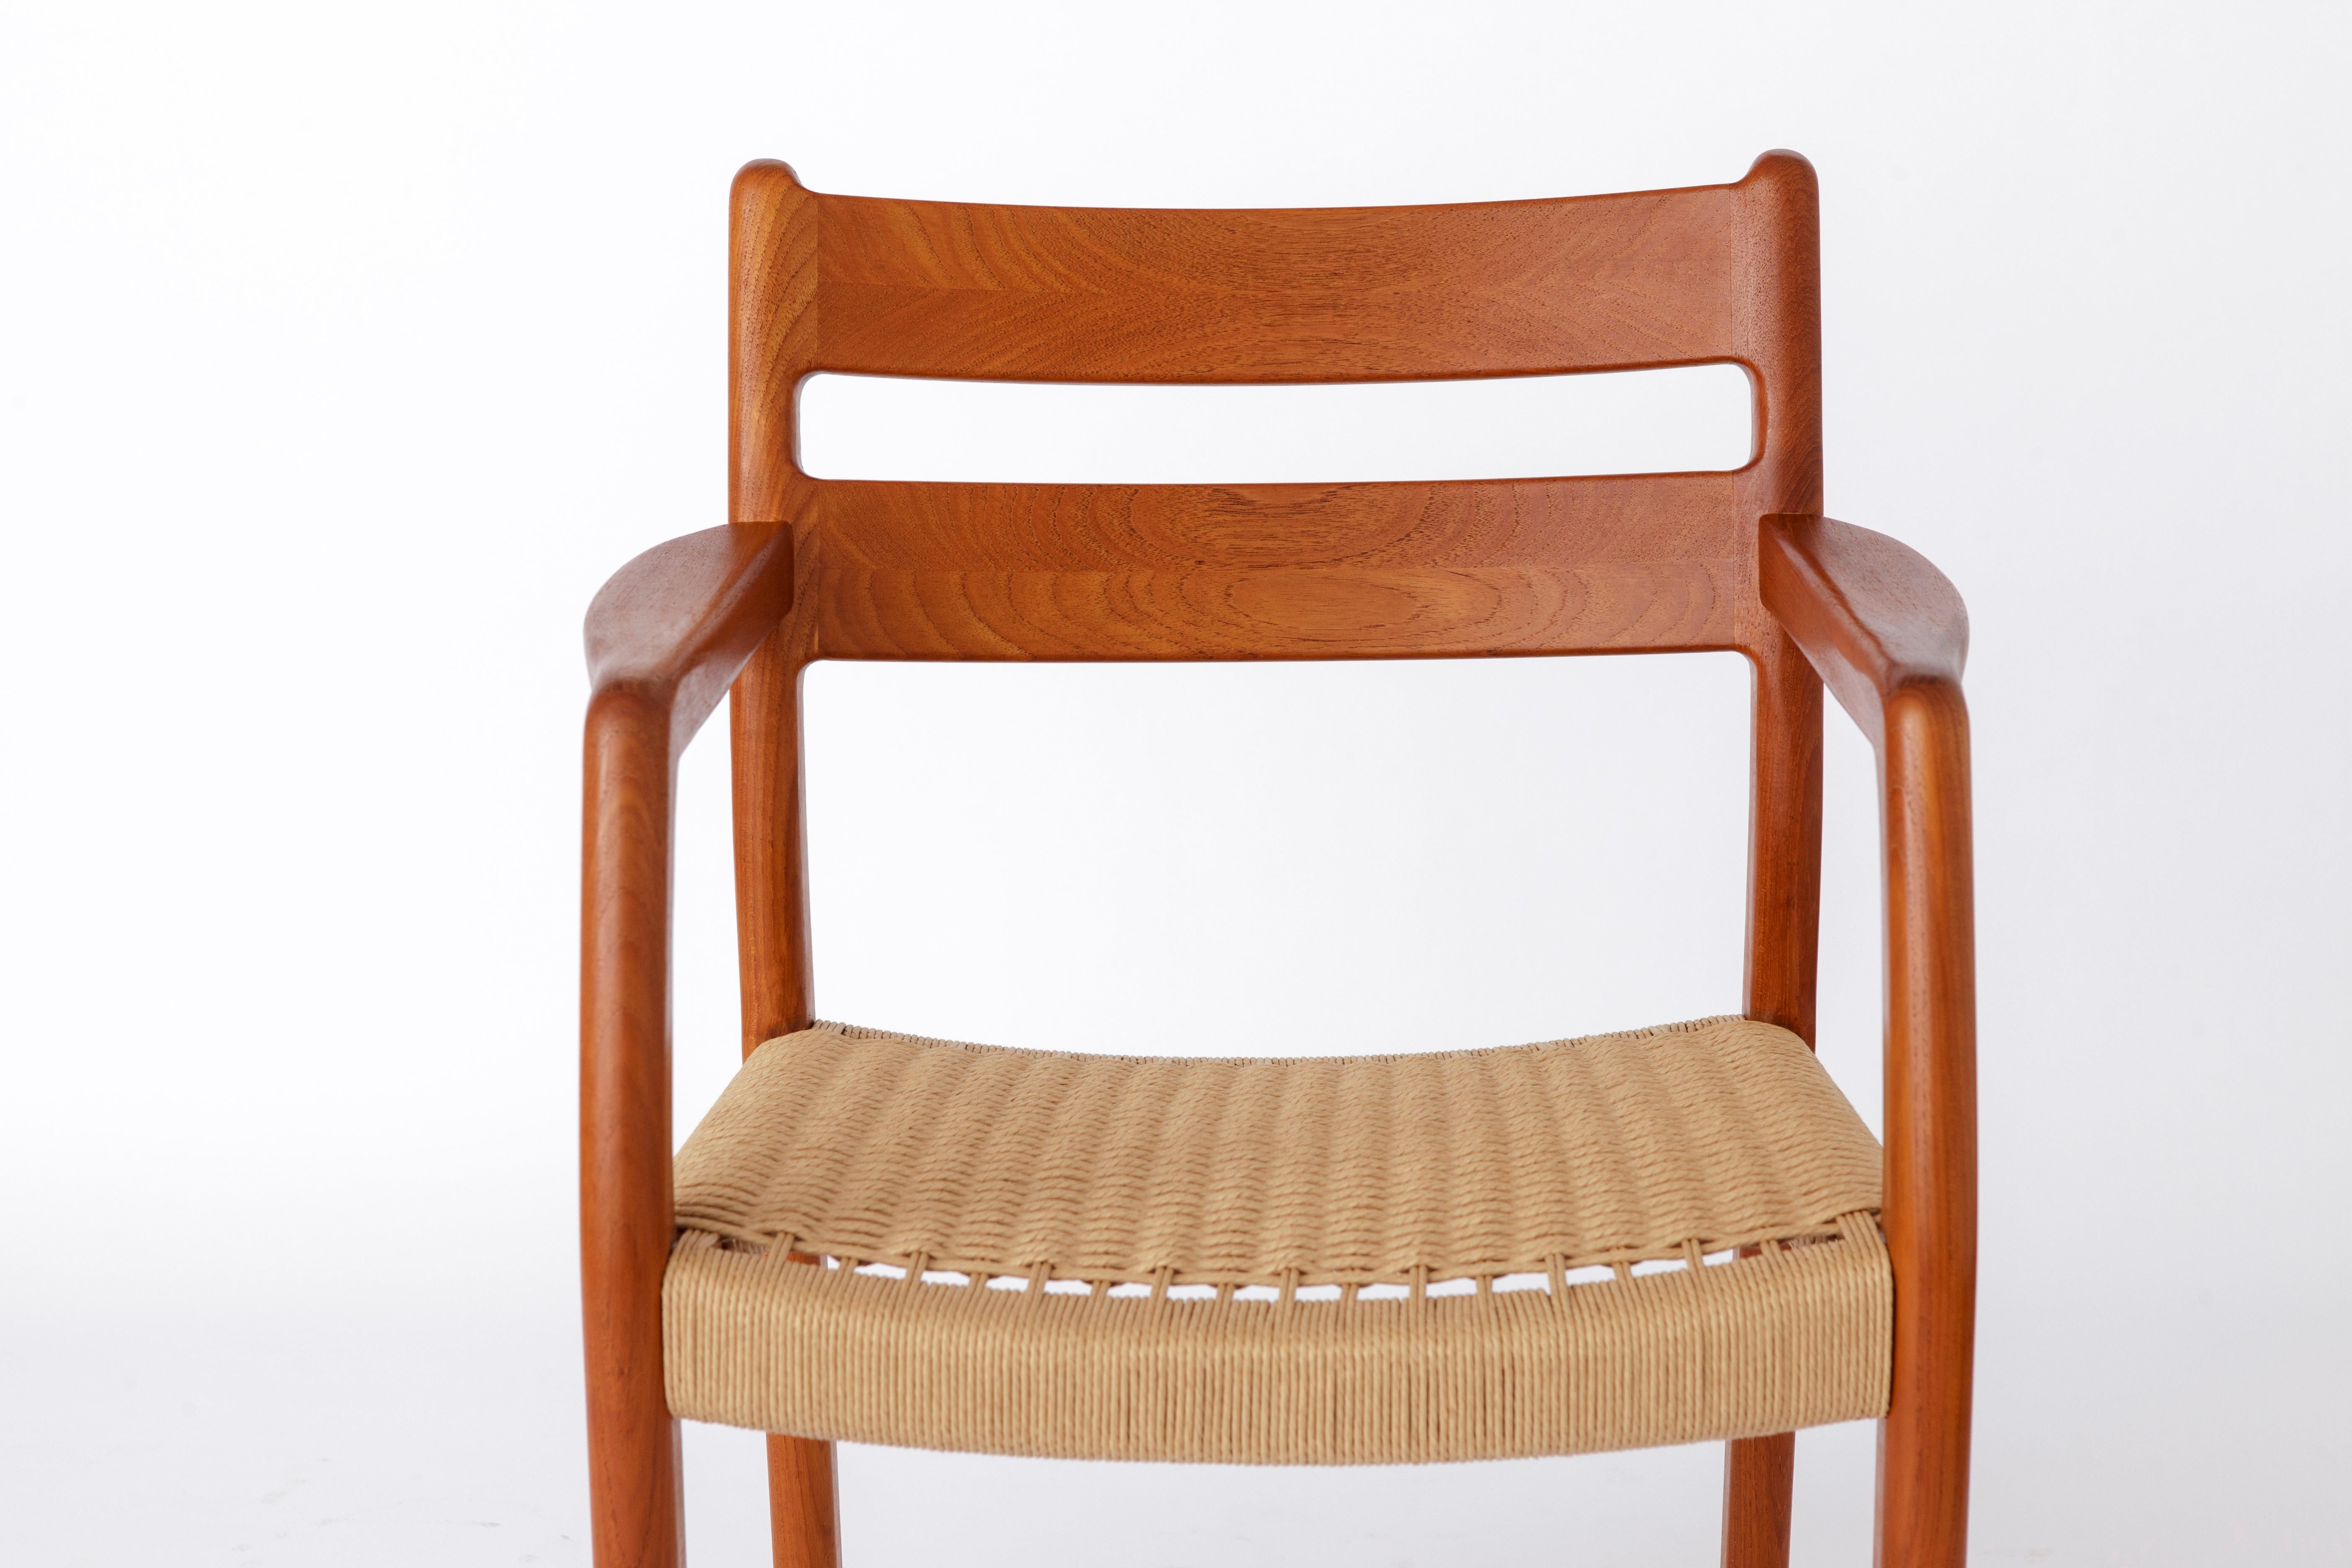 Set of 3 Vintage Chairs 1960s EMC Mobler Danish Teak In Good Condition For Sale In Hannover, DE